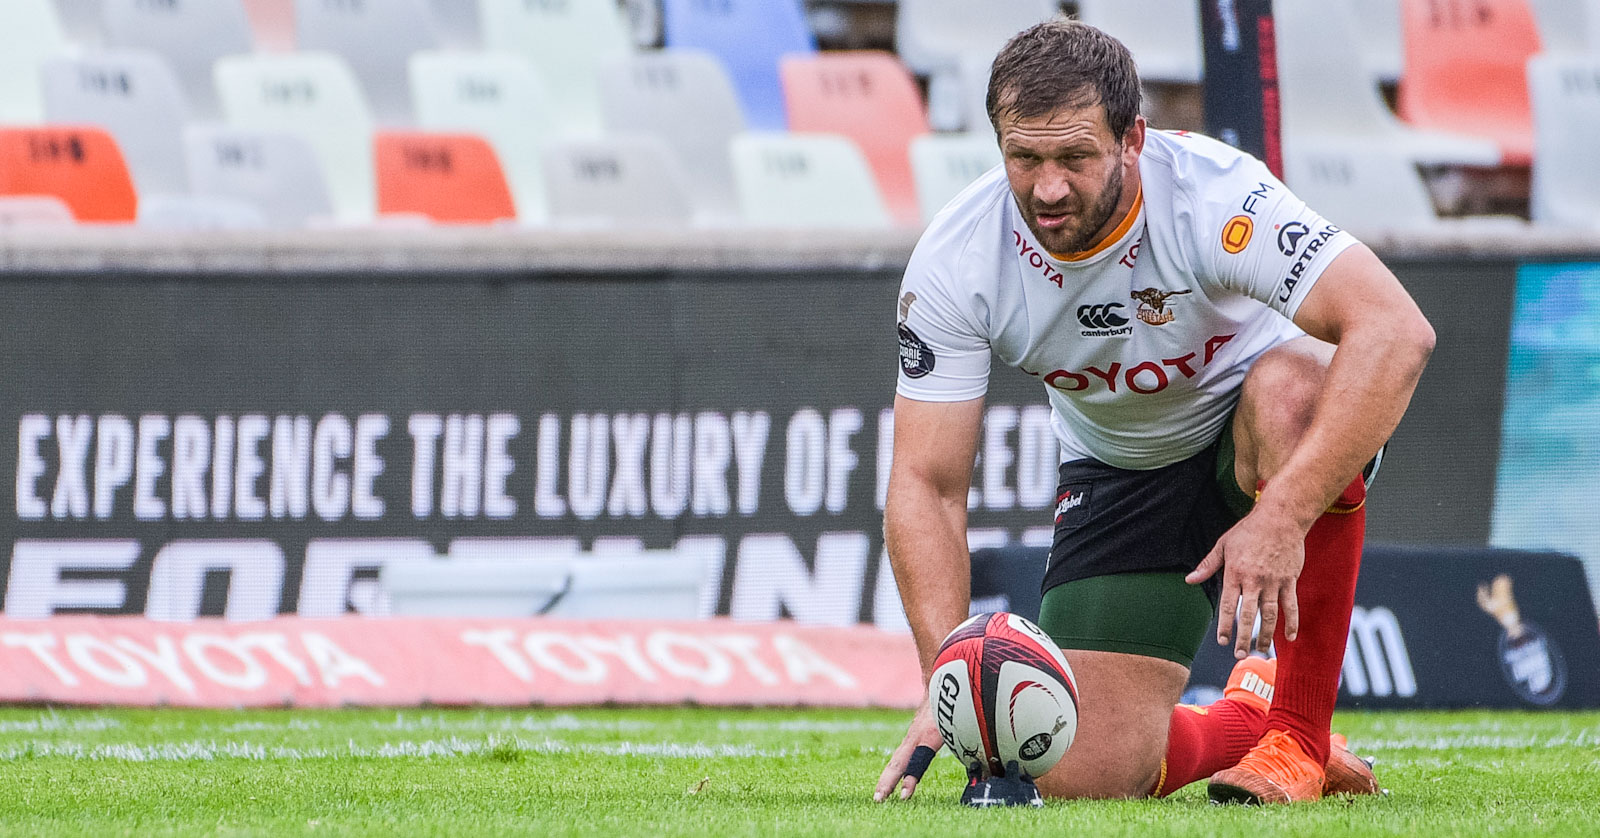 Frans Steyn kicked 19 points for the Toyota Cheetahs